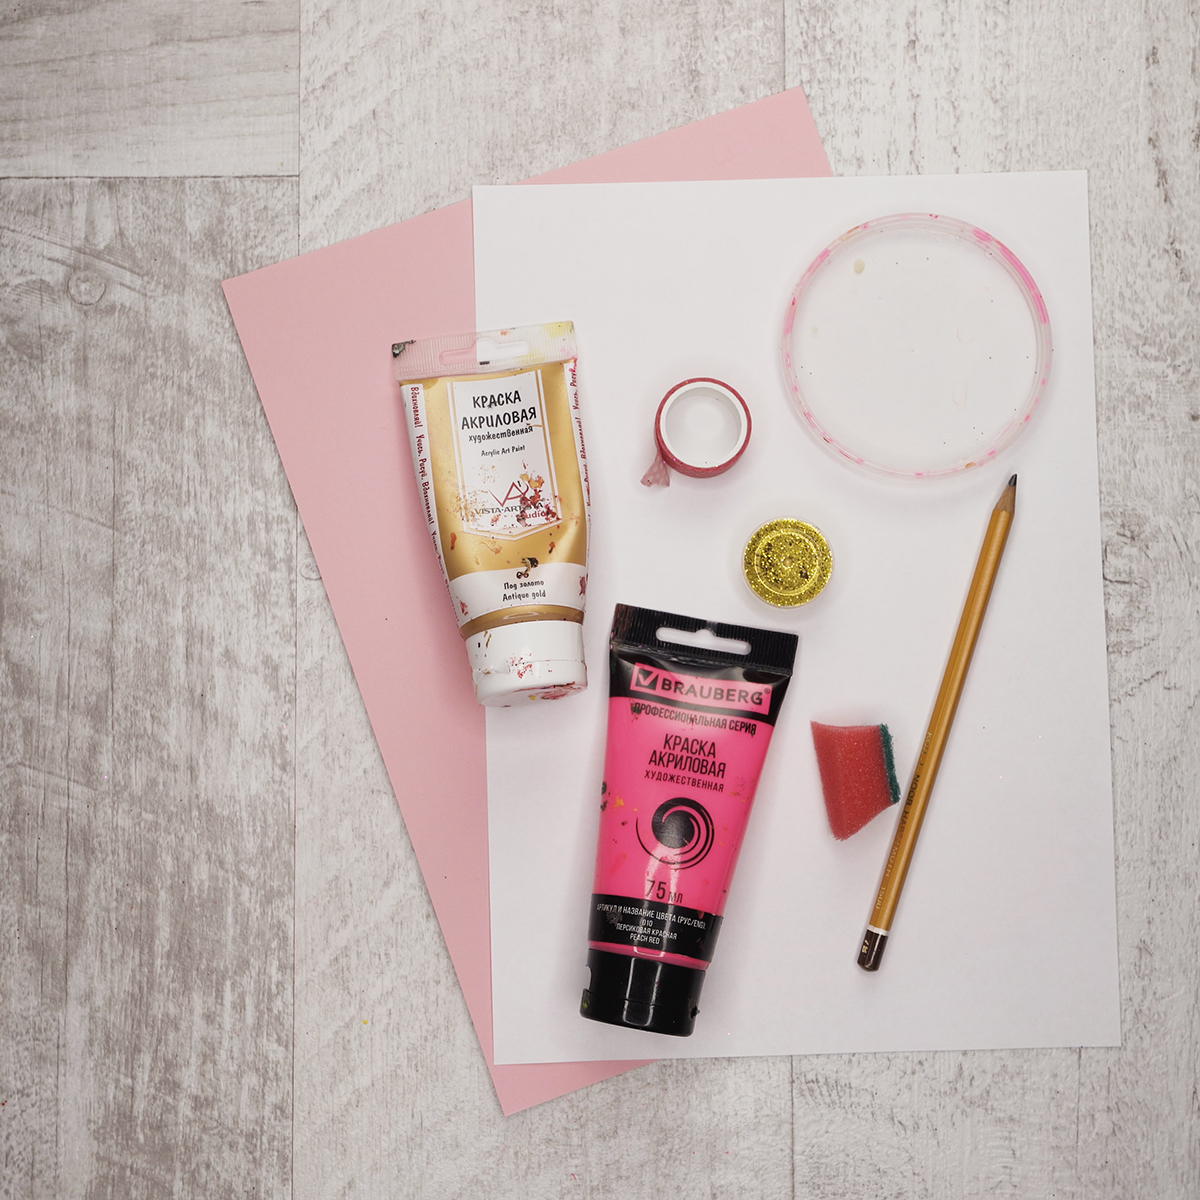 The supplies are pink and white paper, pink and gold paints, some sponge, a pencil and gold glitter